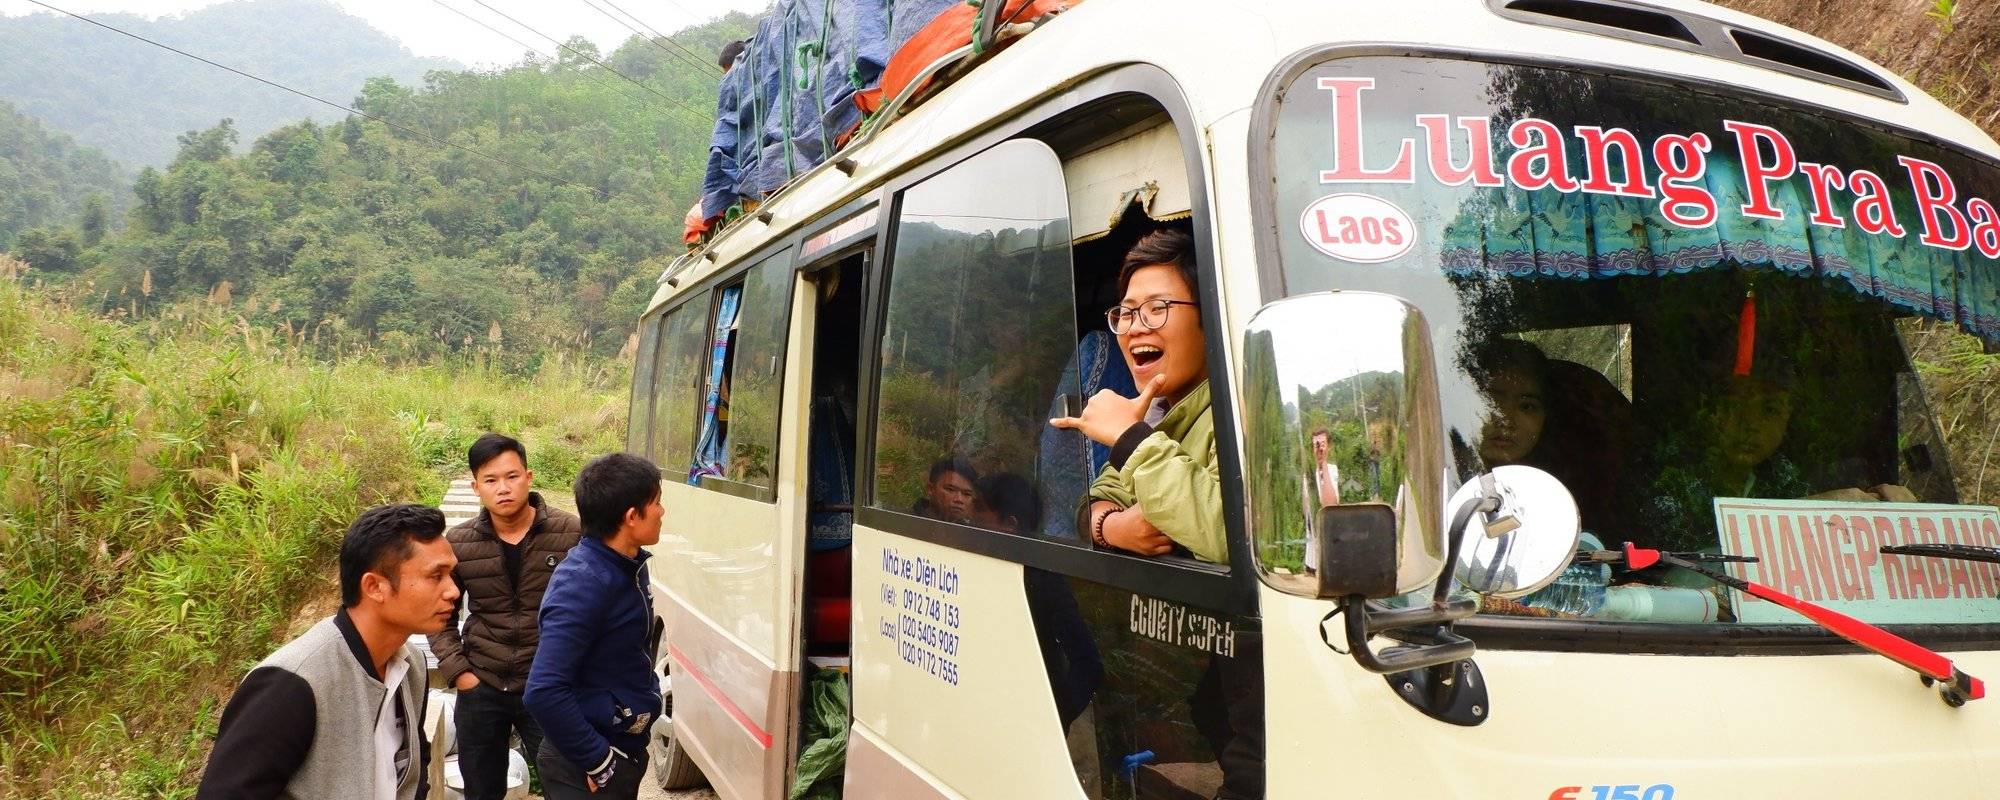 Inday Clara Travels Solo #16: I survived a 26 hour Bus trip from Sapa, Vietnam to Luang Prabang, Laos!